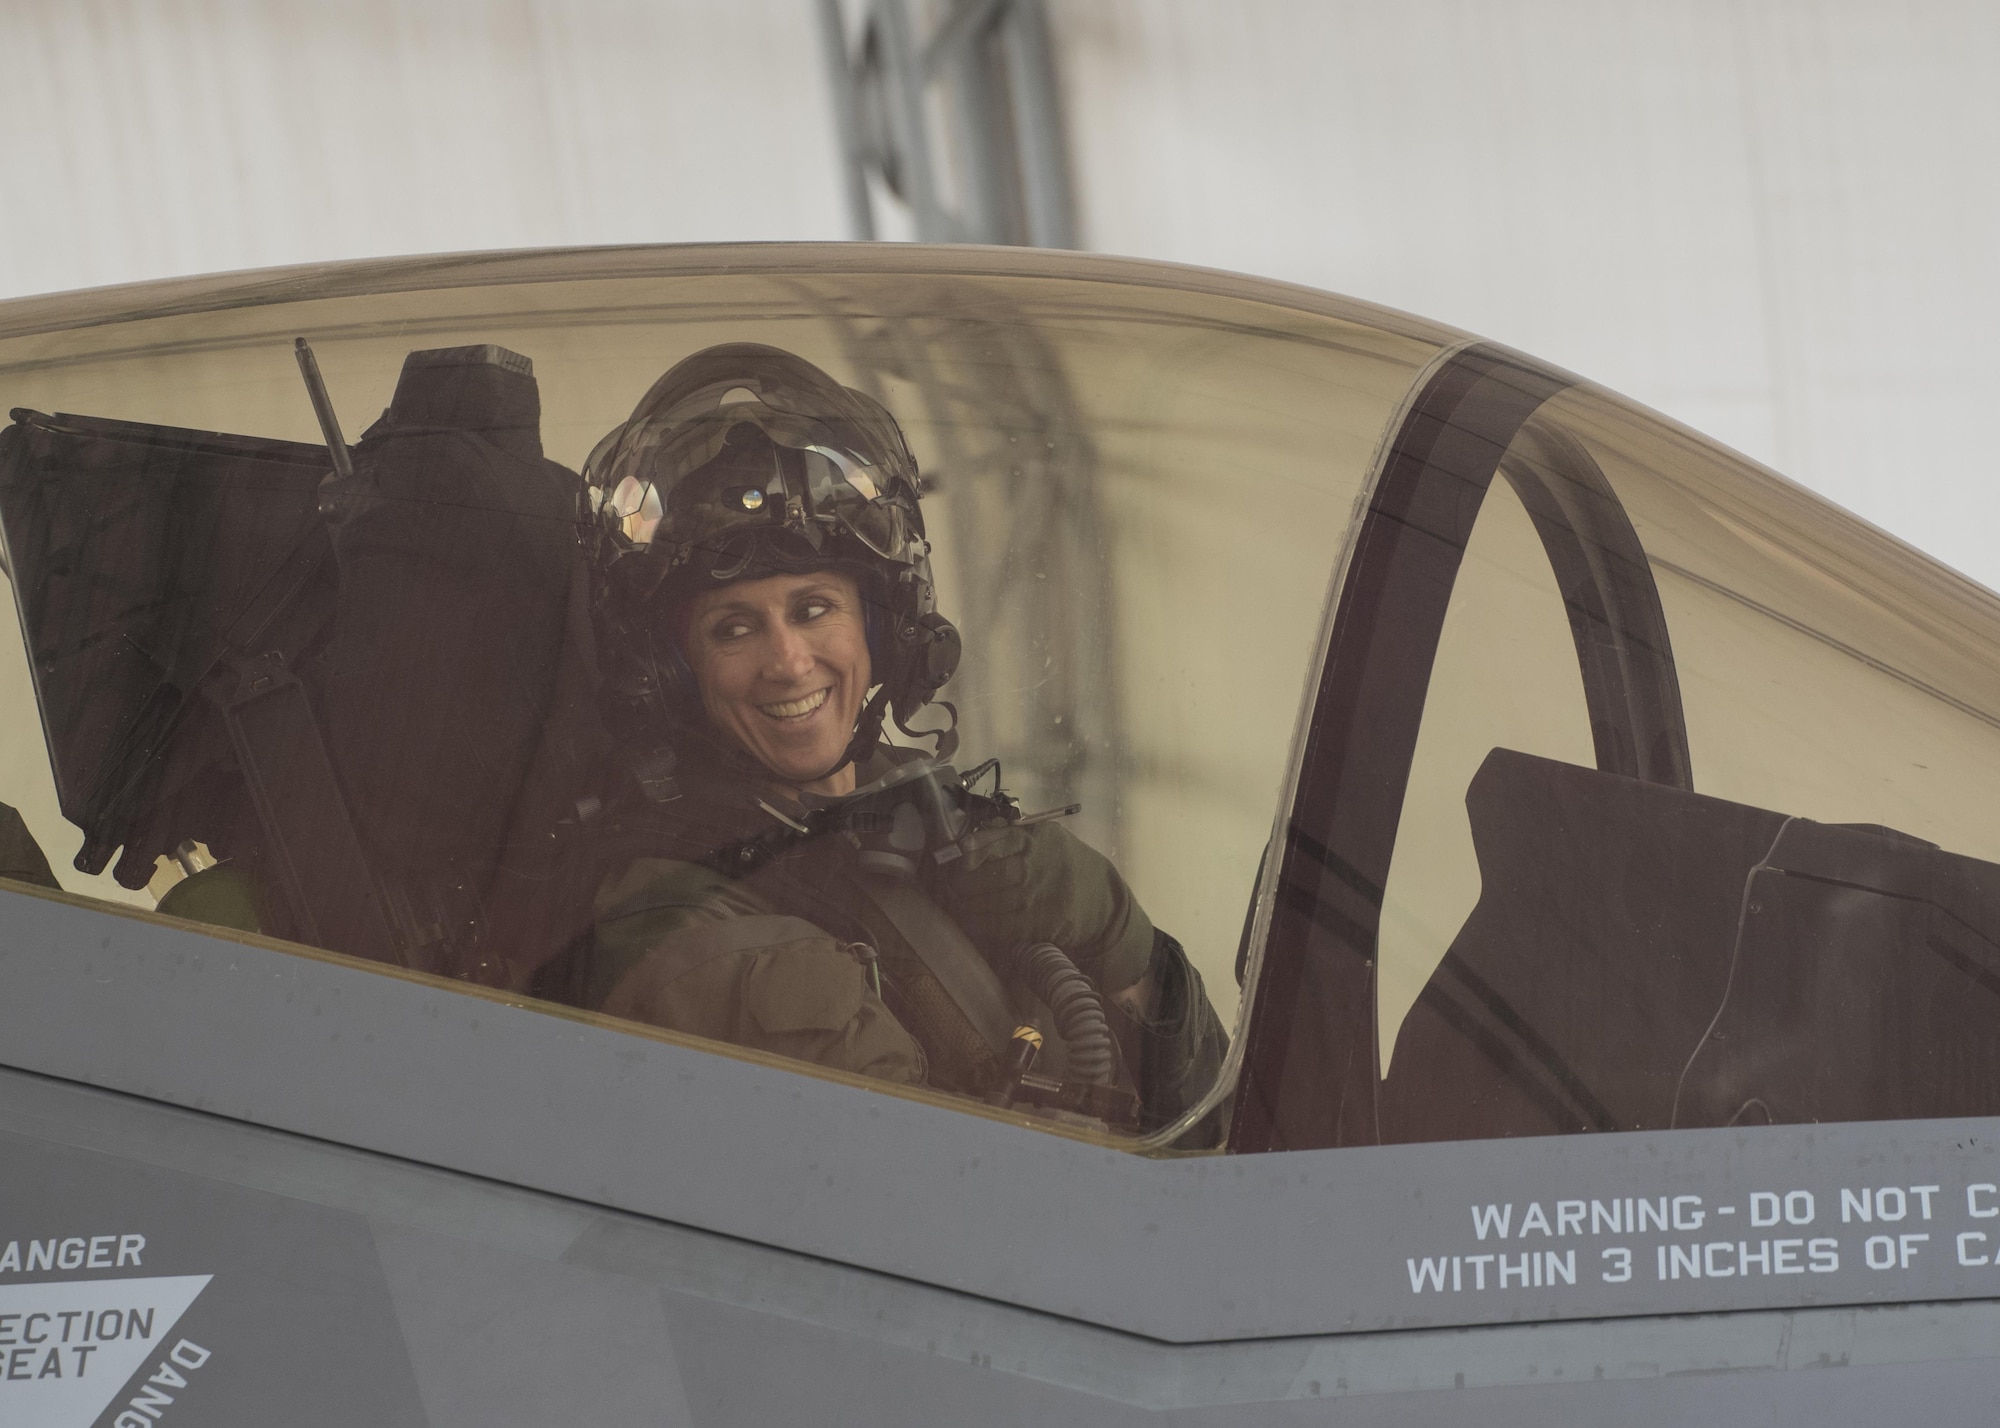 U.S. Air Force Lt. Col. Christine Mau, 33rd Operations Group deputy commander, looks back to one of her crew chiefs from an F-35A Lightning II Feb. 27, 2017, at Eglin Air Force Base, Florida. In 2013, Mau became the first and only female F-35 pilot in the world after flying the F-15E Strike Eagle for 16 years. She uses her unique position to embolden and motivate young men and women into the field of aviation. (U.S. Air Force photo by Staff Sgt. Peter Thompson)